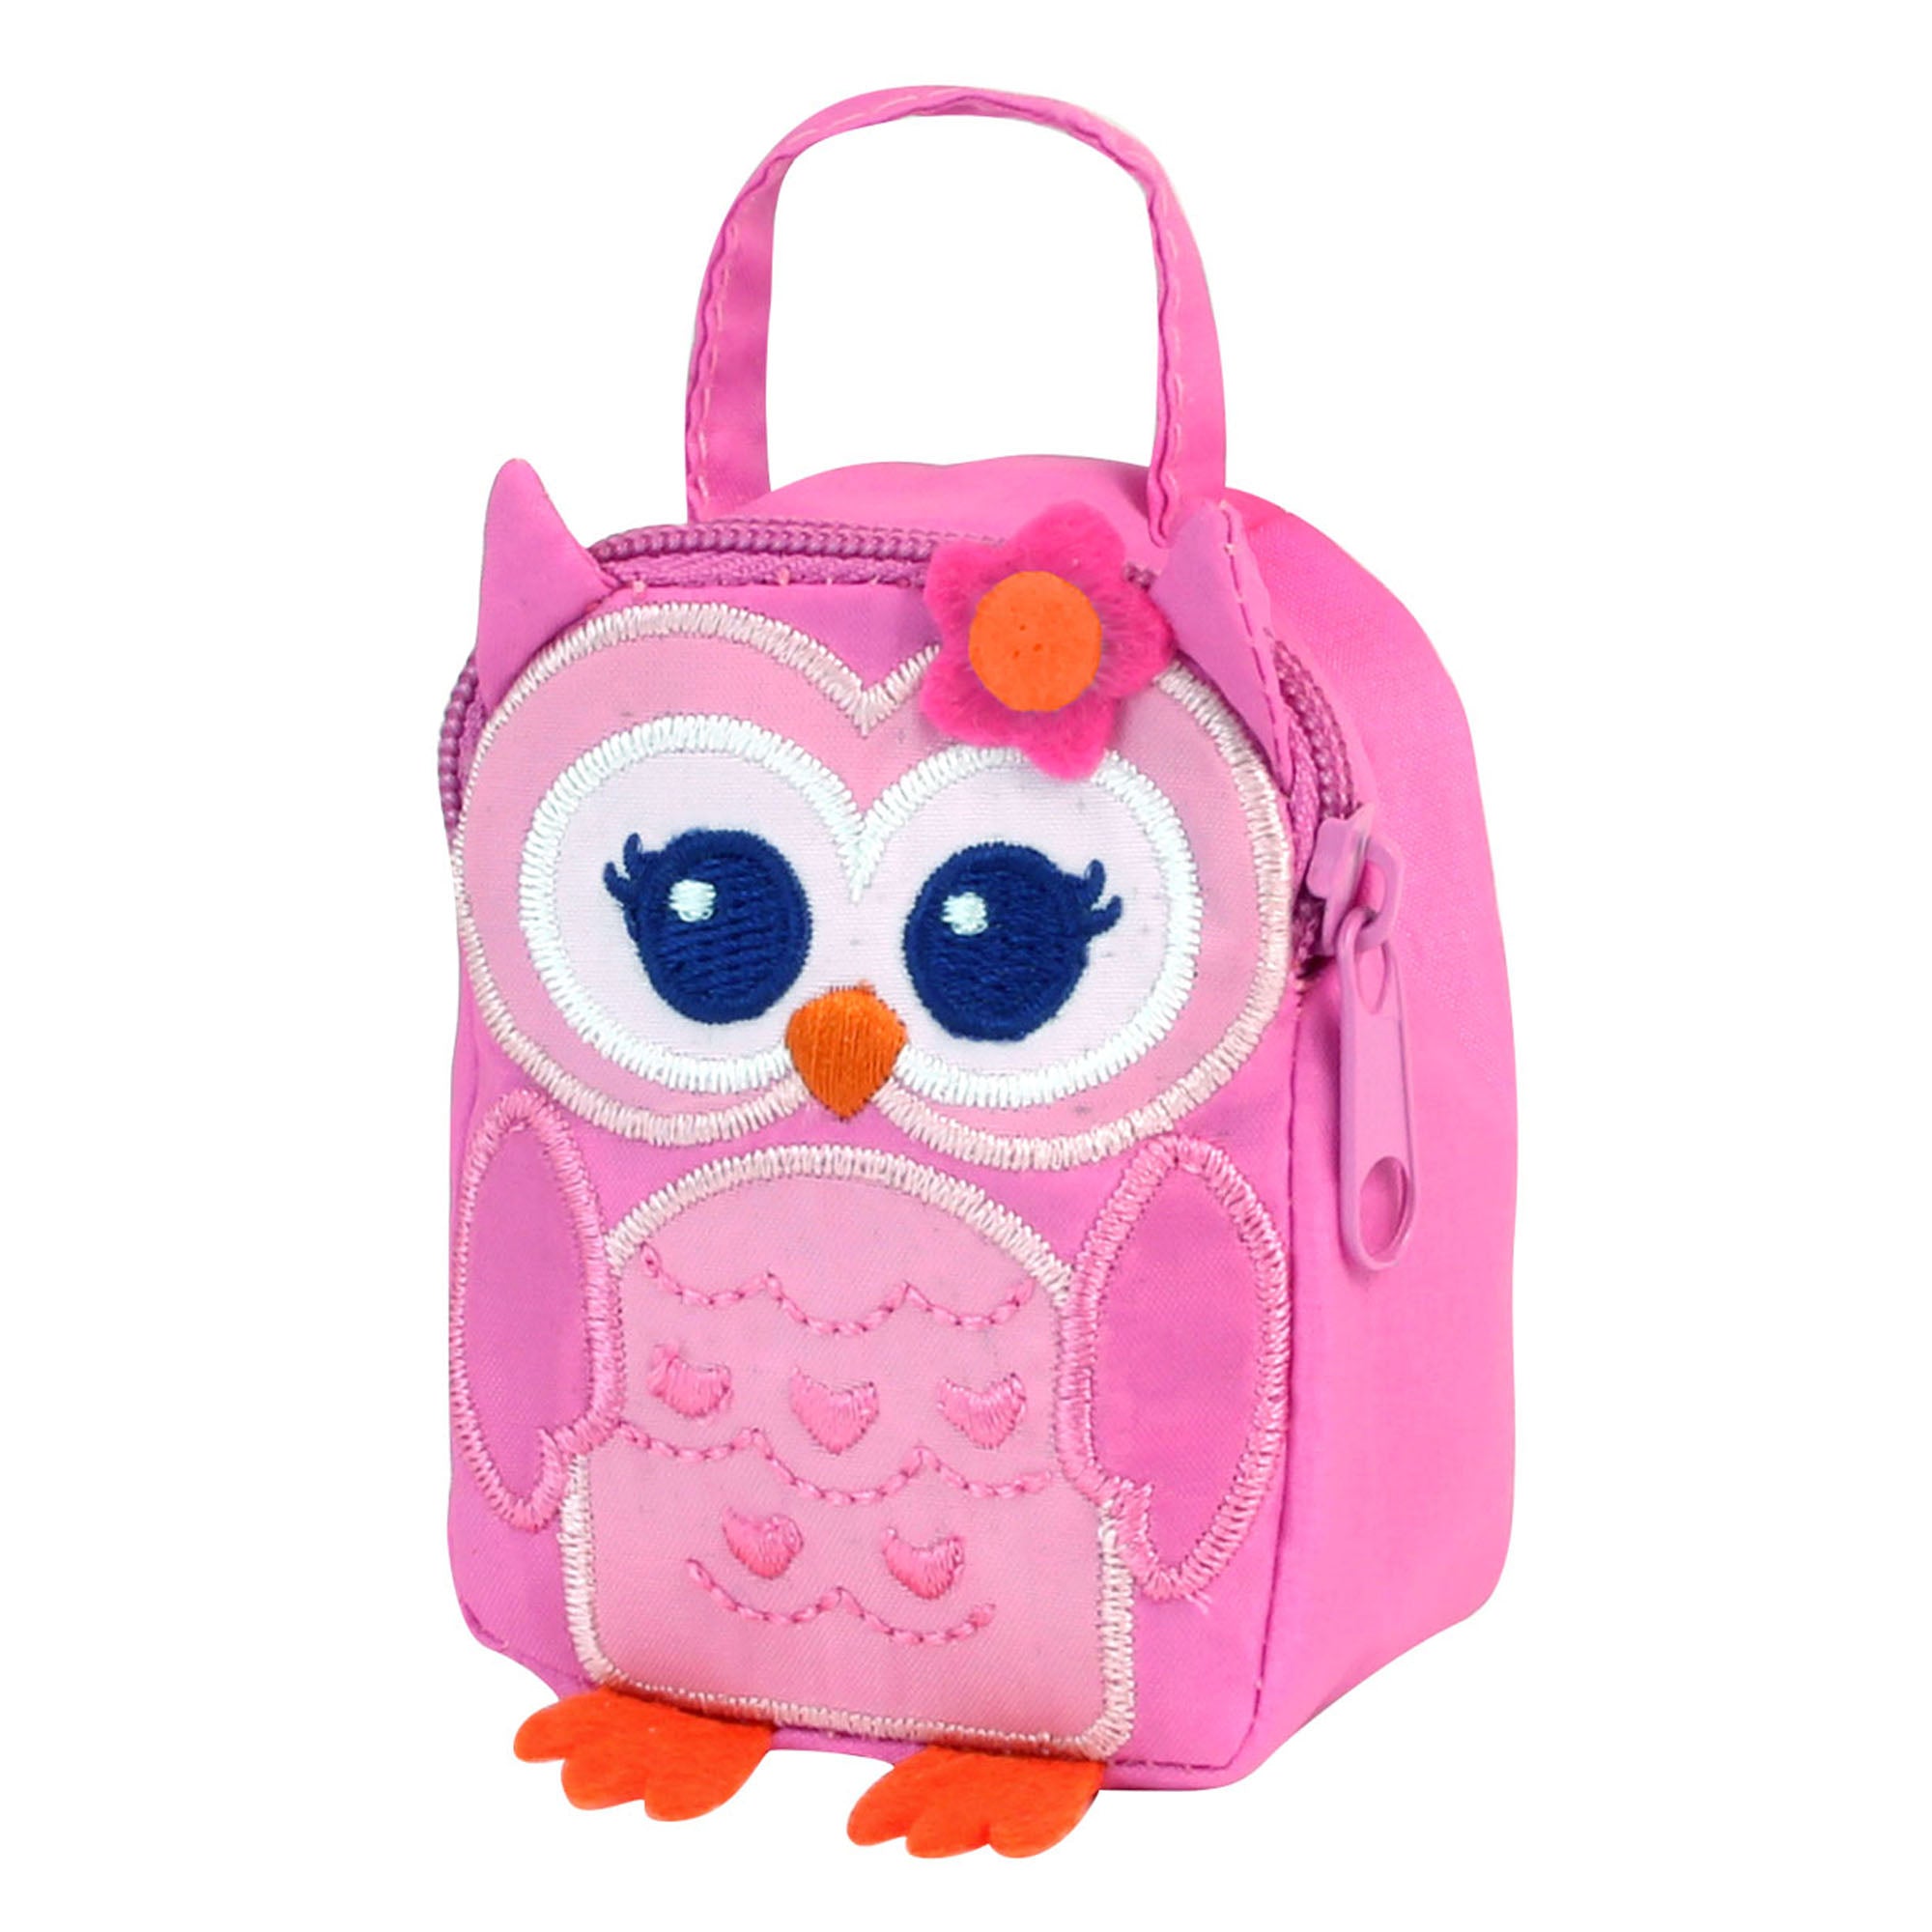 Sophia’s Owl Lunch Bag with Embroidered Details & Zipper Closure for 18” Dolls, Pink